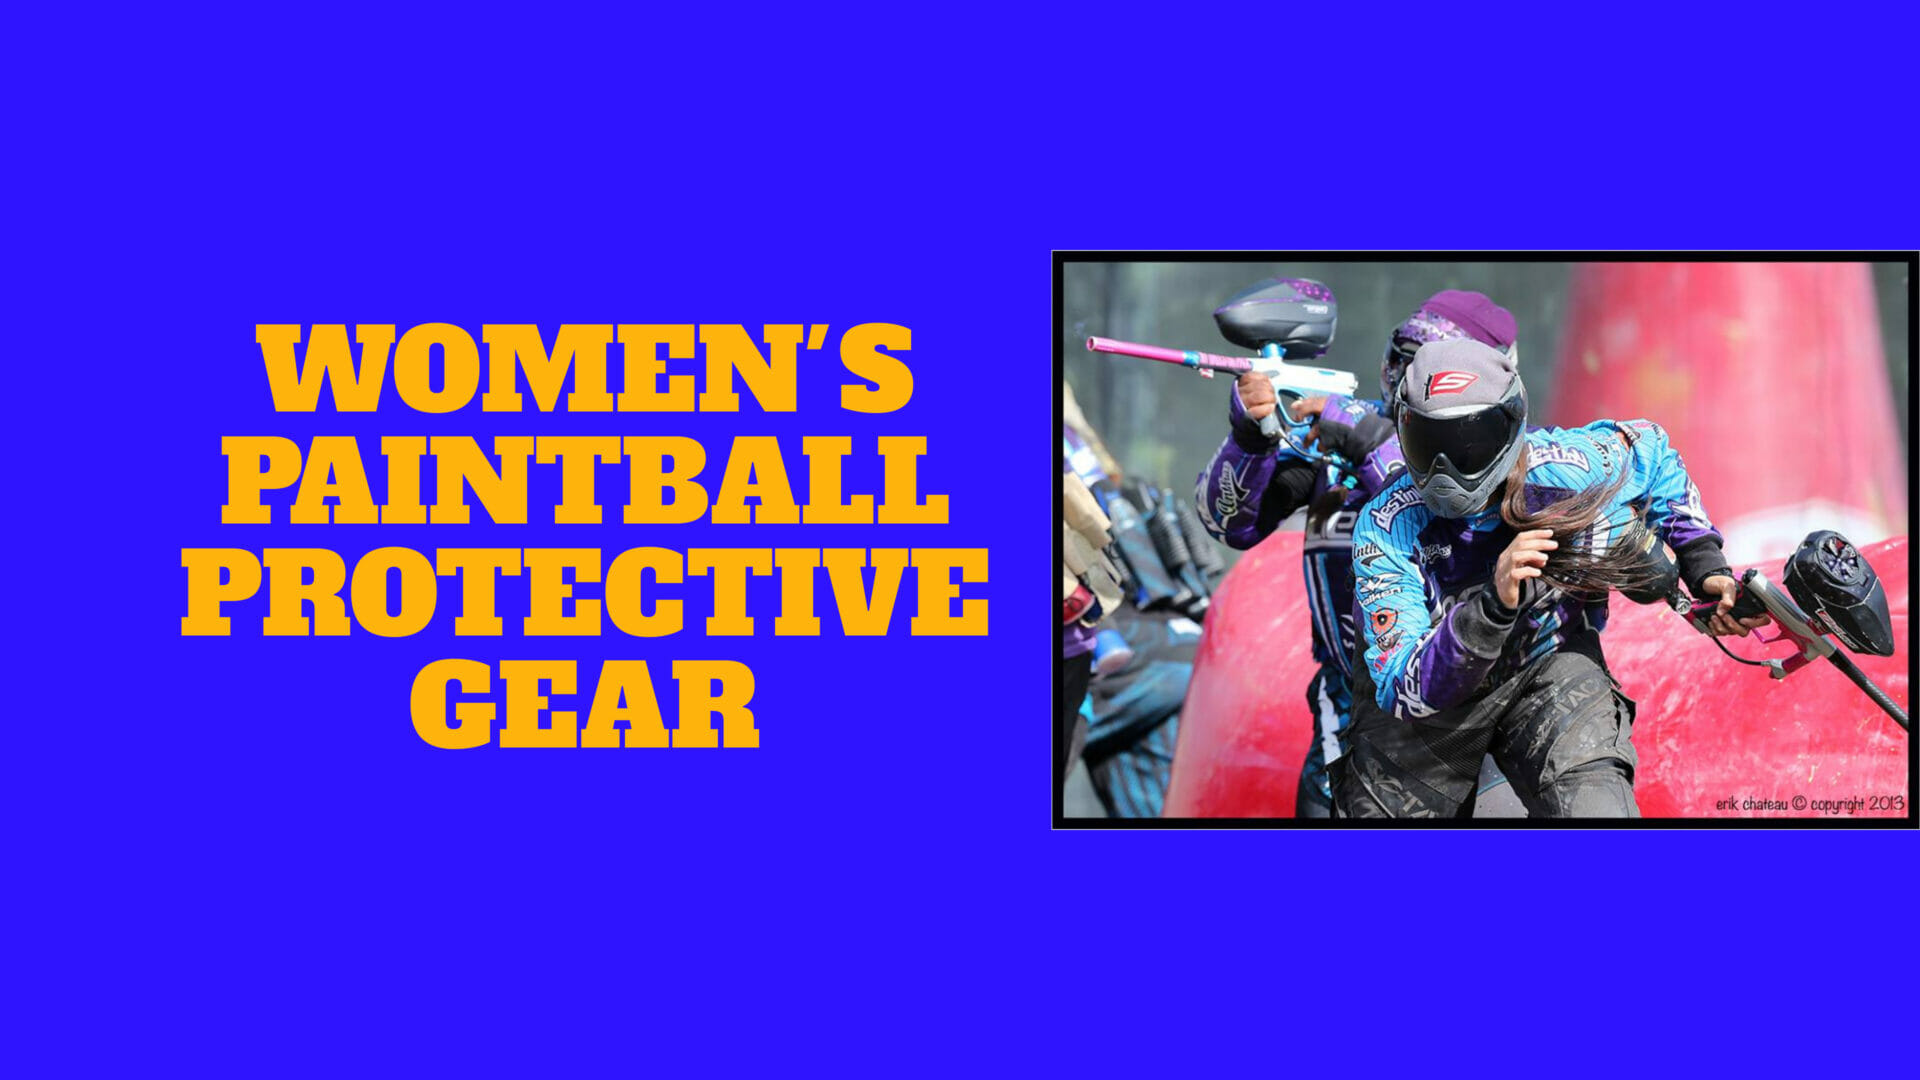 Women's Paintball Protective Gear